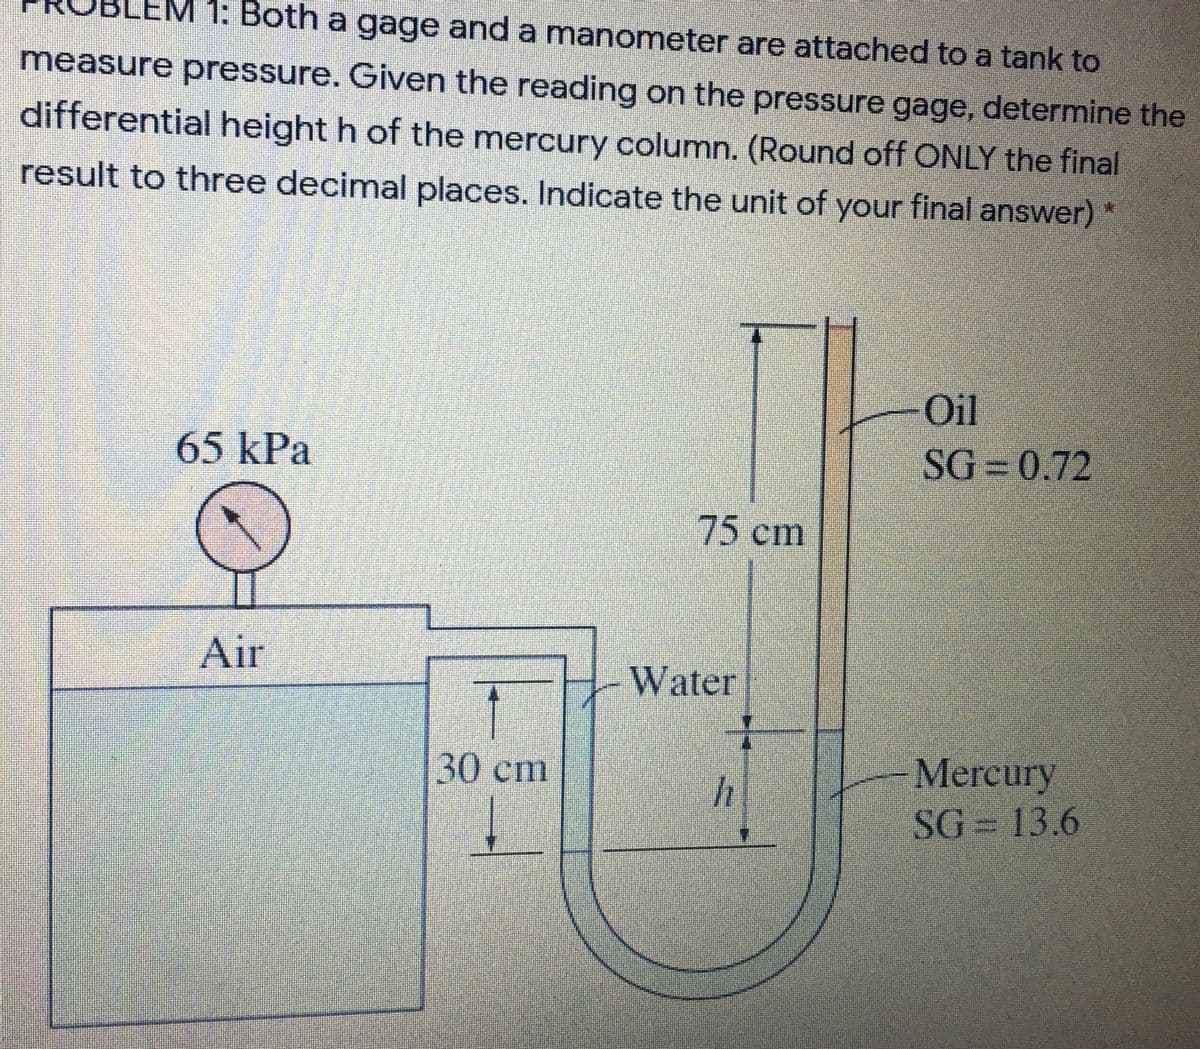 1: Both a gage and a manometer are attached to a tank to
measure pressure. Given the reading on the pressure gage, determine the
differential height h of the mercury column. (Round off ONLY the final
result to three decimal places. Indicate the unit of your final answer) *
Oil
65kPa
SG 0.72
75cm
Air
Water
Mercury
SG = 13.6
30cm
